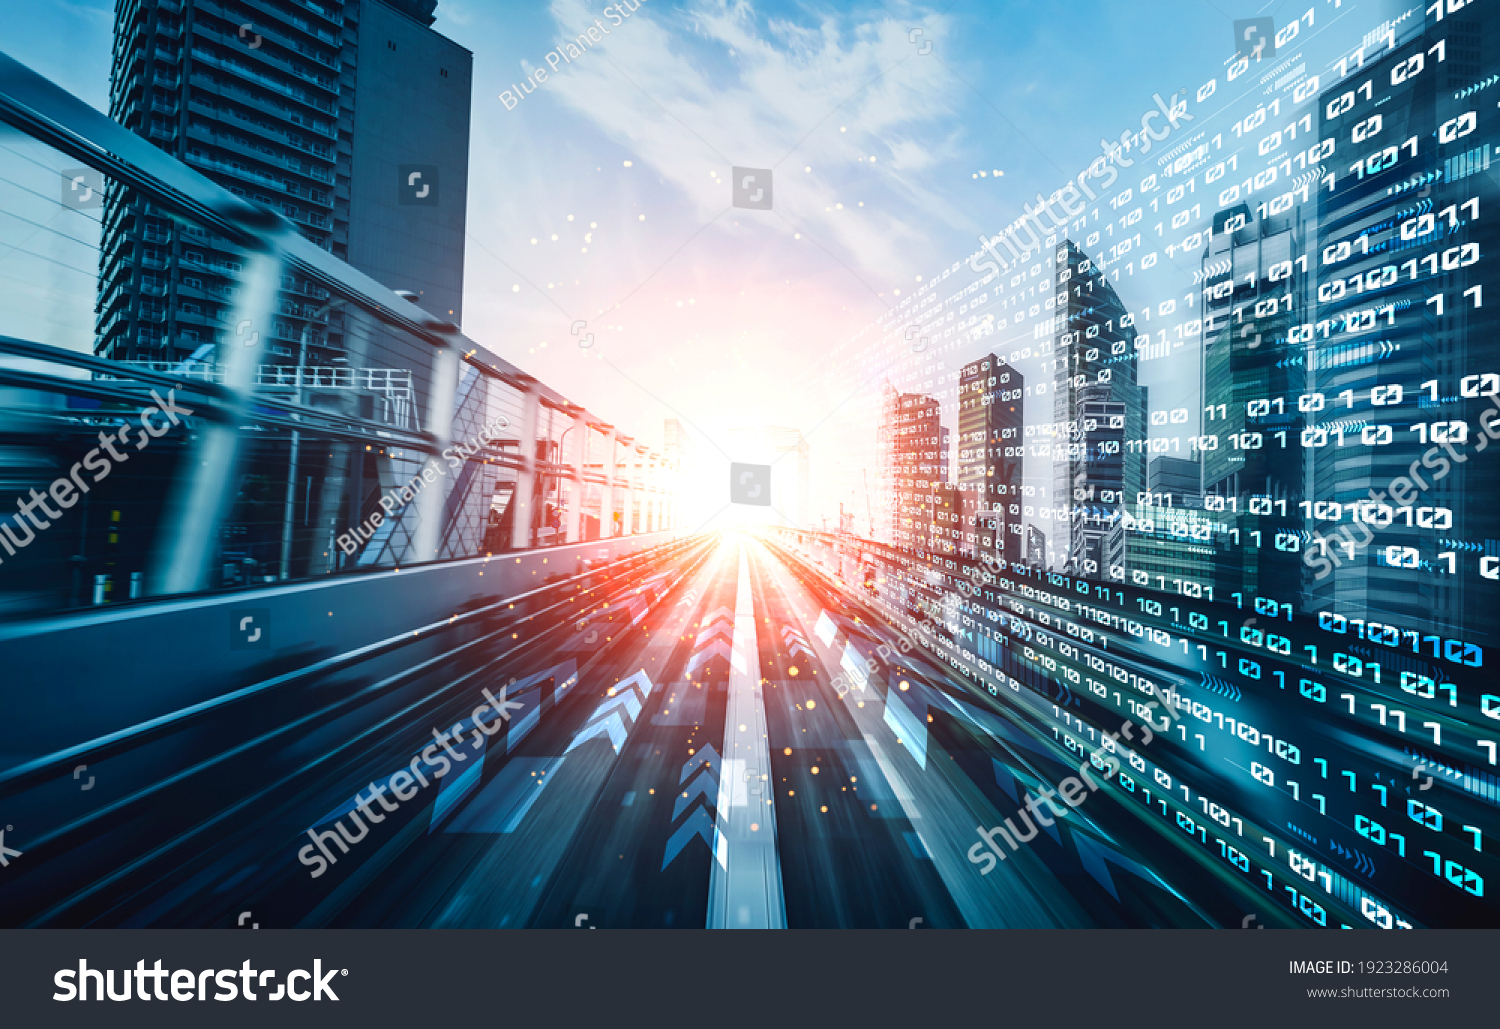 Digital data flow on road with motion blur to create vision of fast speed transfer . Concept of future digital transformation , disruptive innovation and agile business methodology . #1923286004